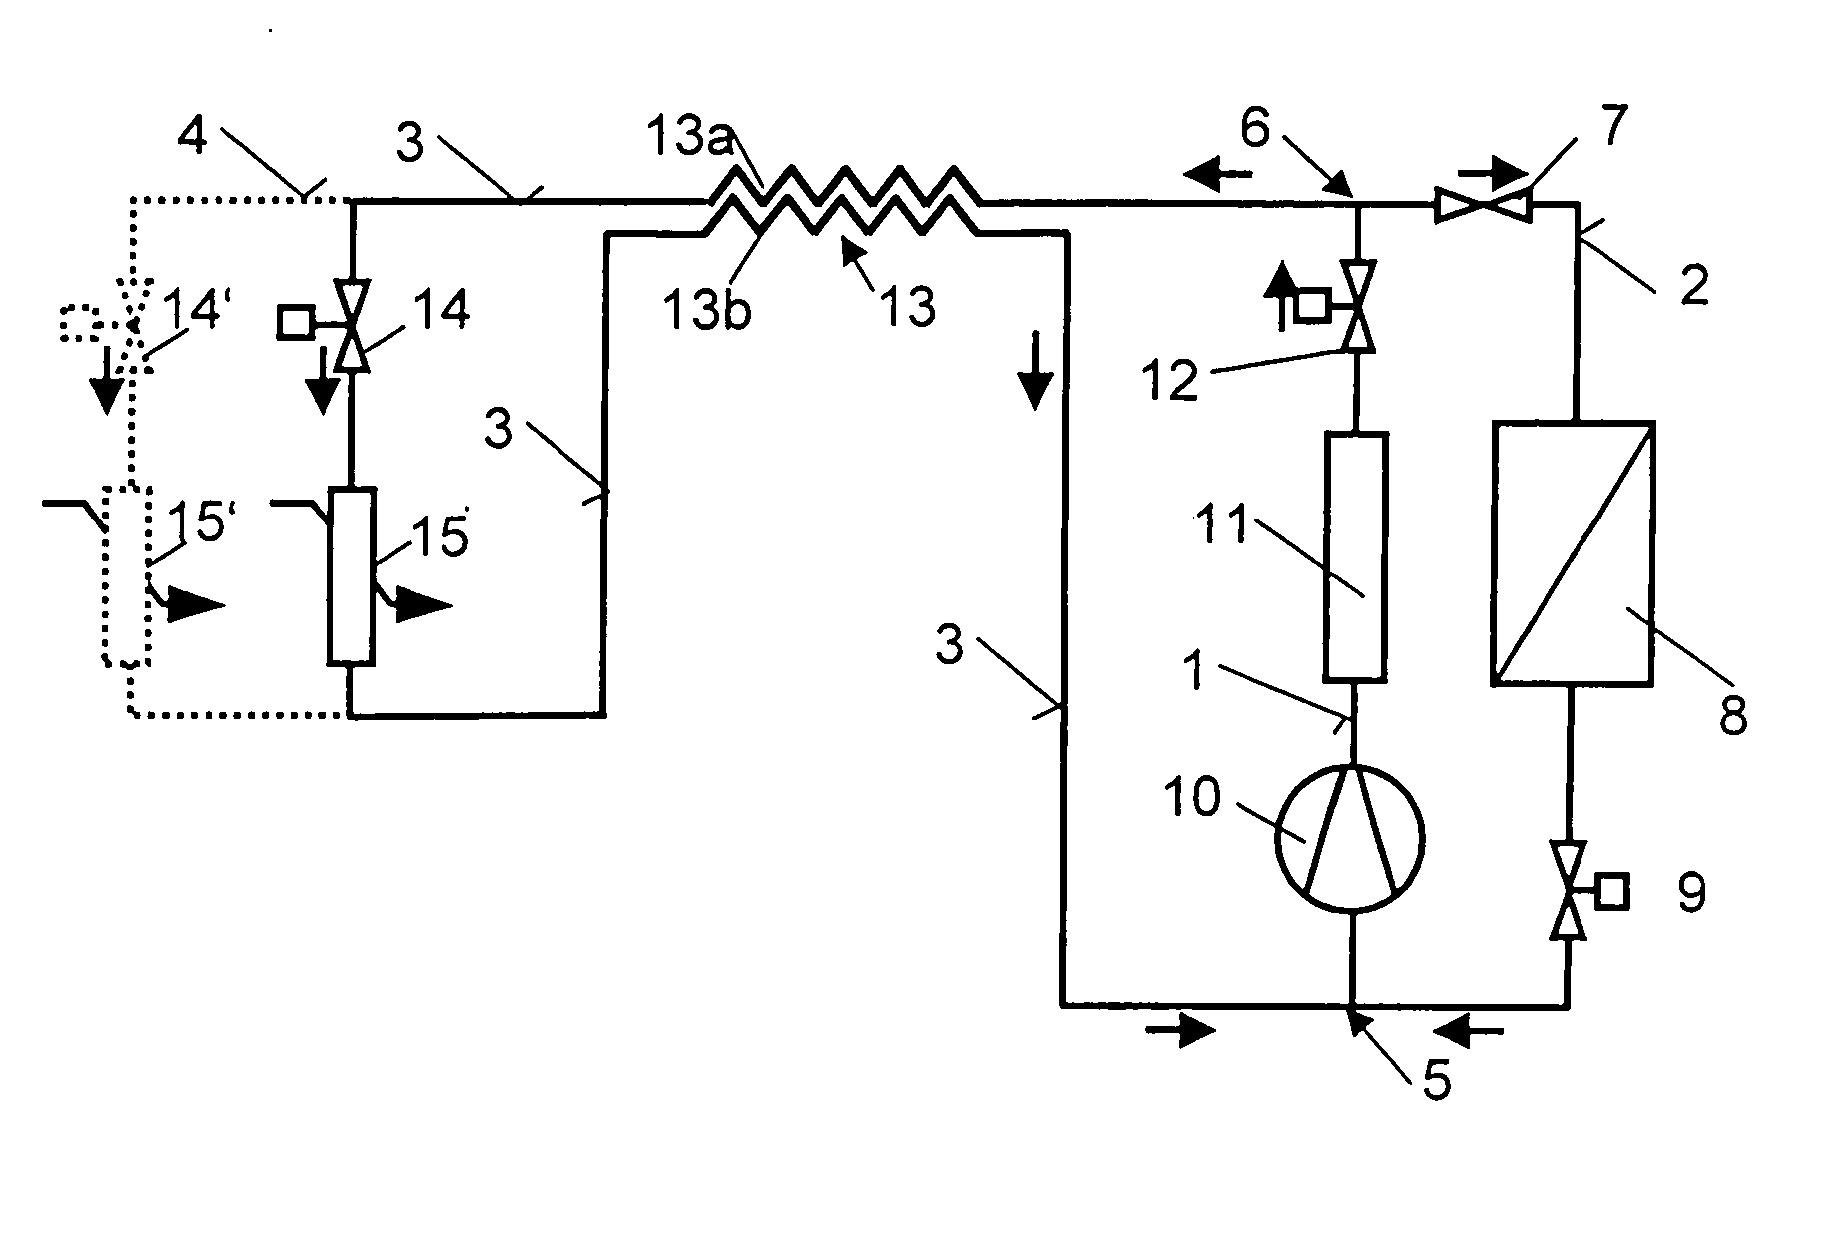 Vehicle with an air-conditioning system and a heat source